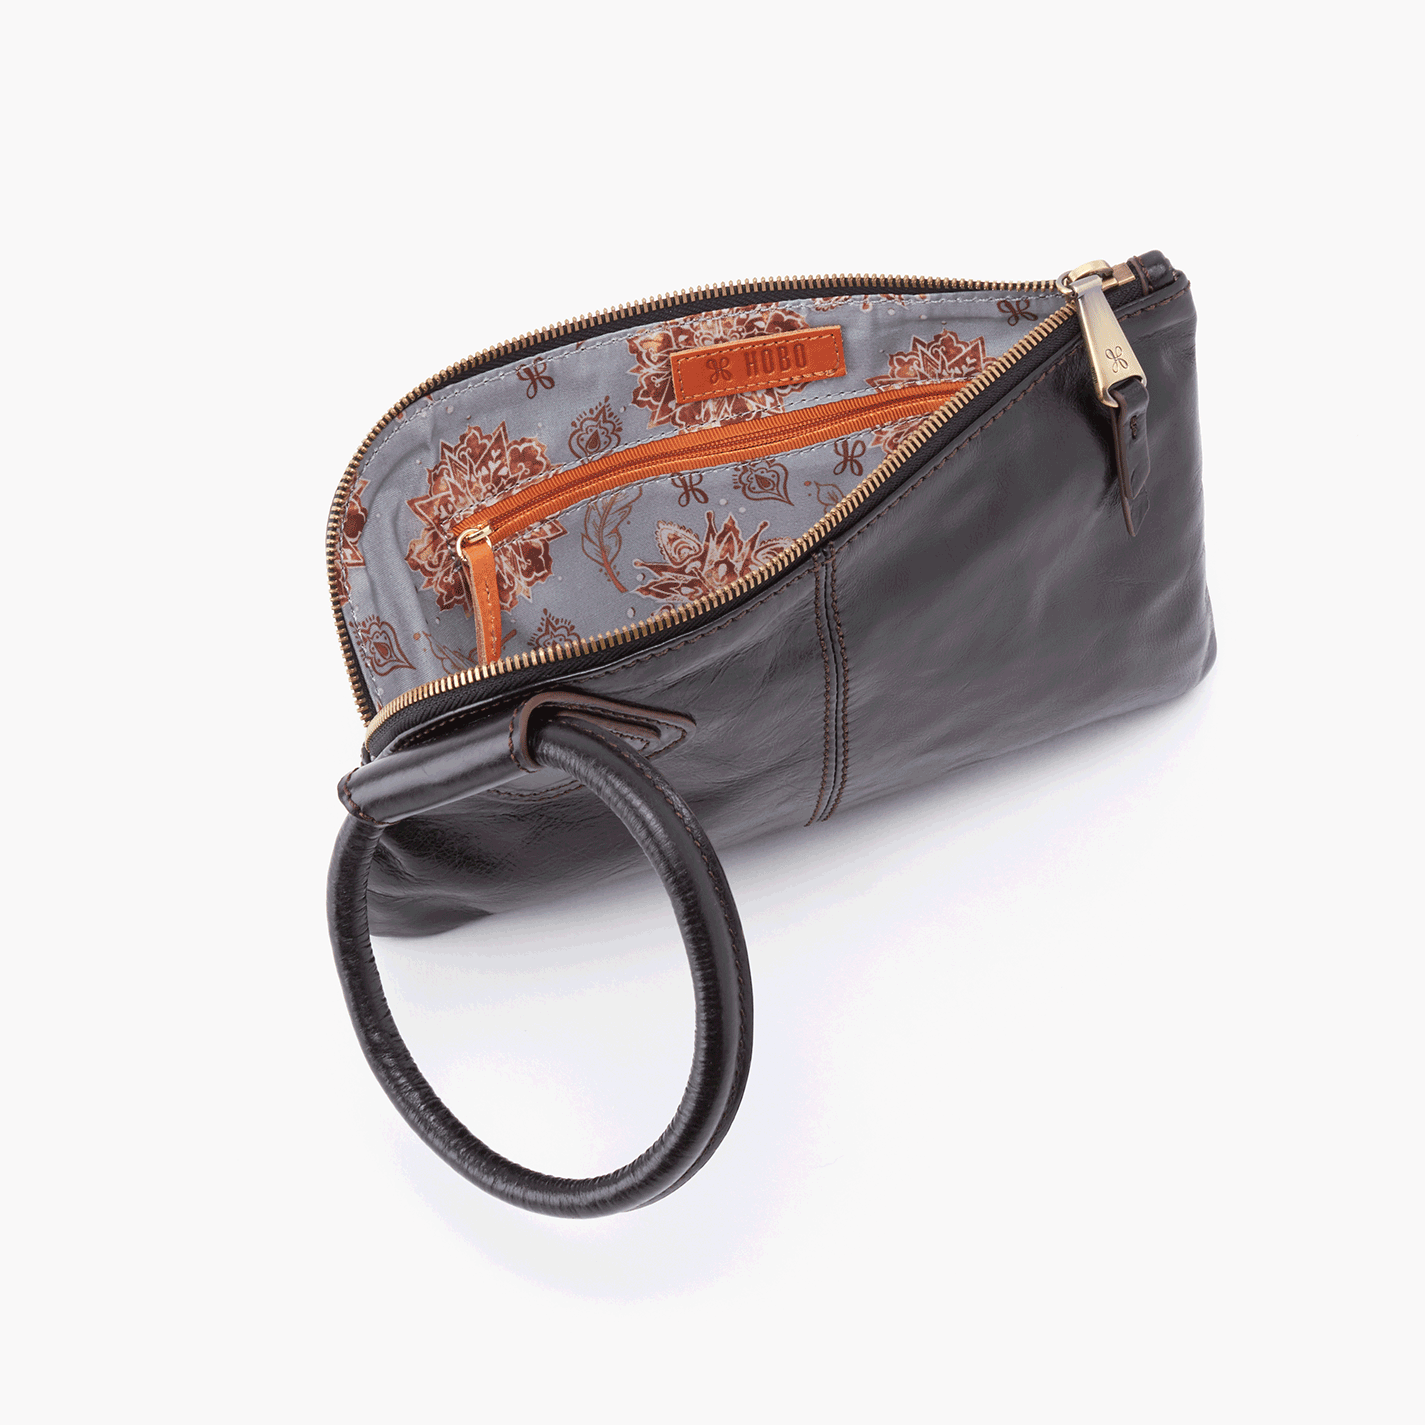 open view of the black sable wristlet on a white background